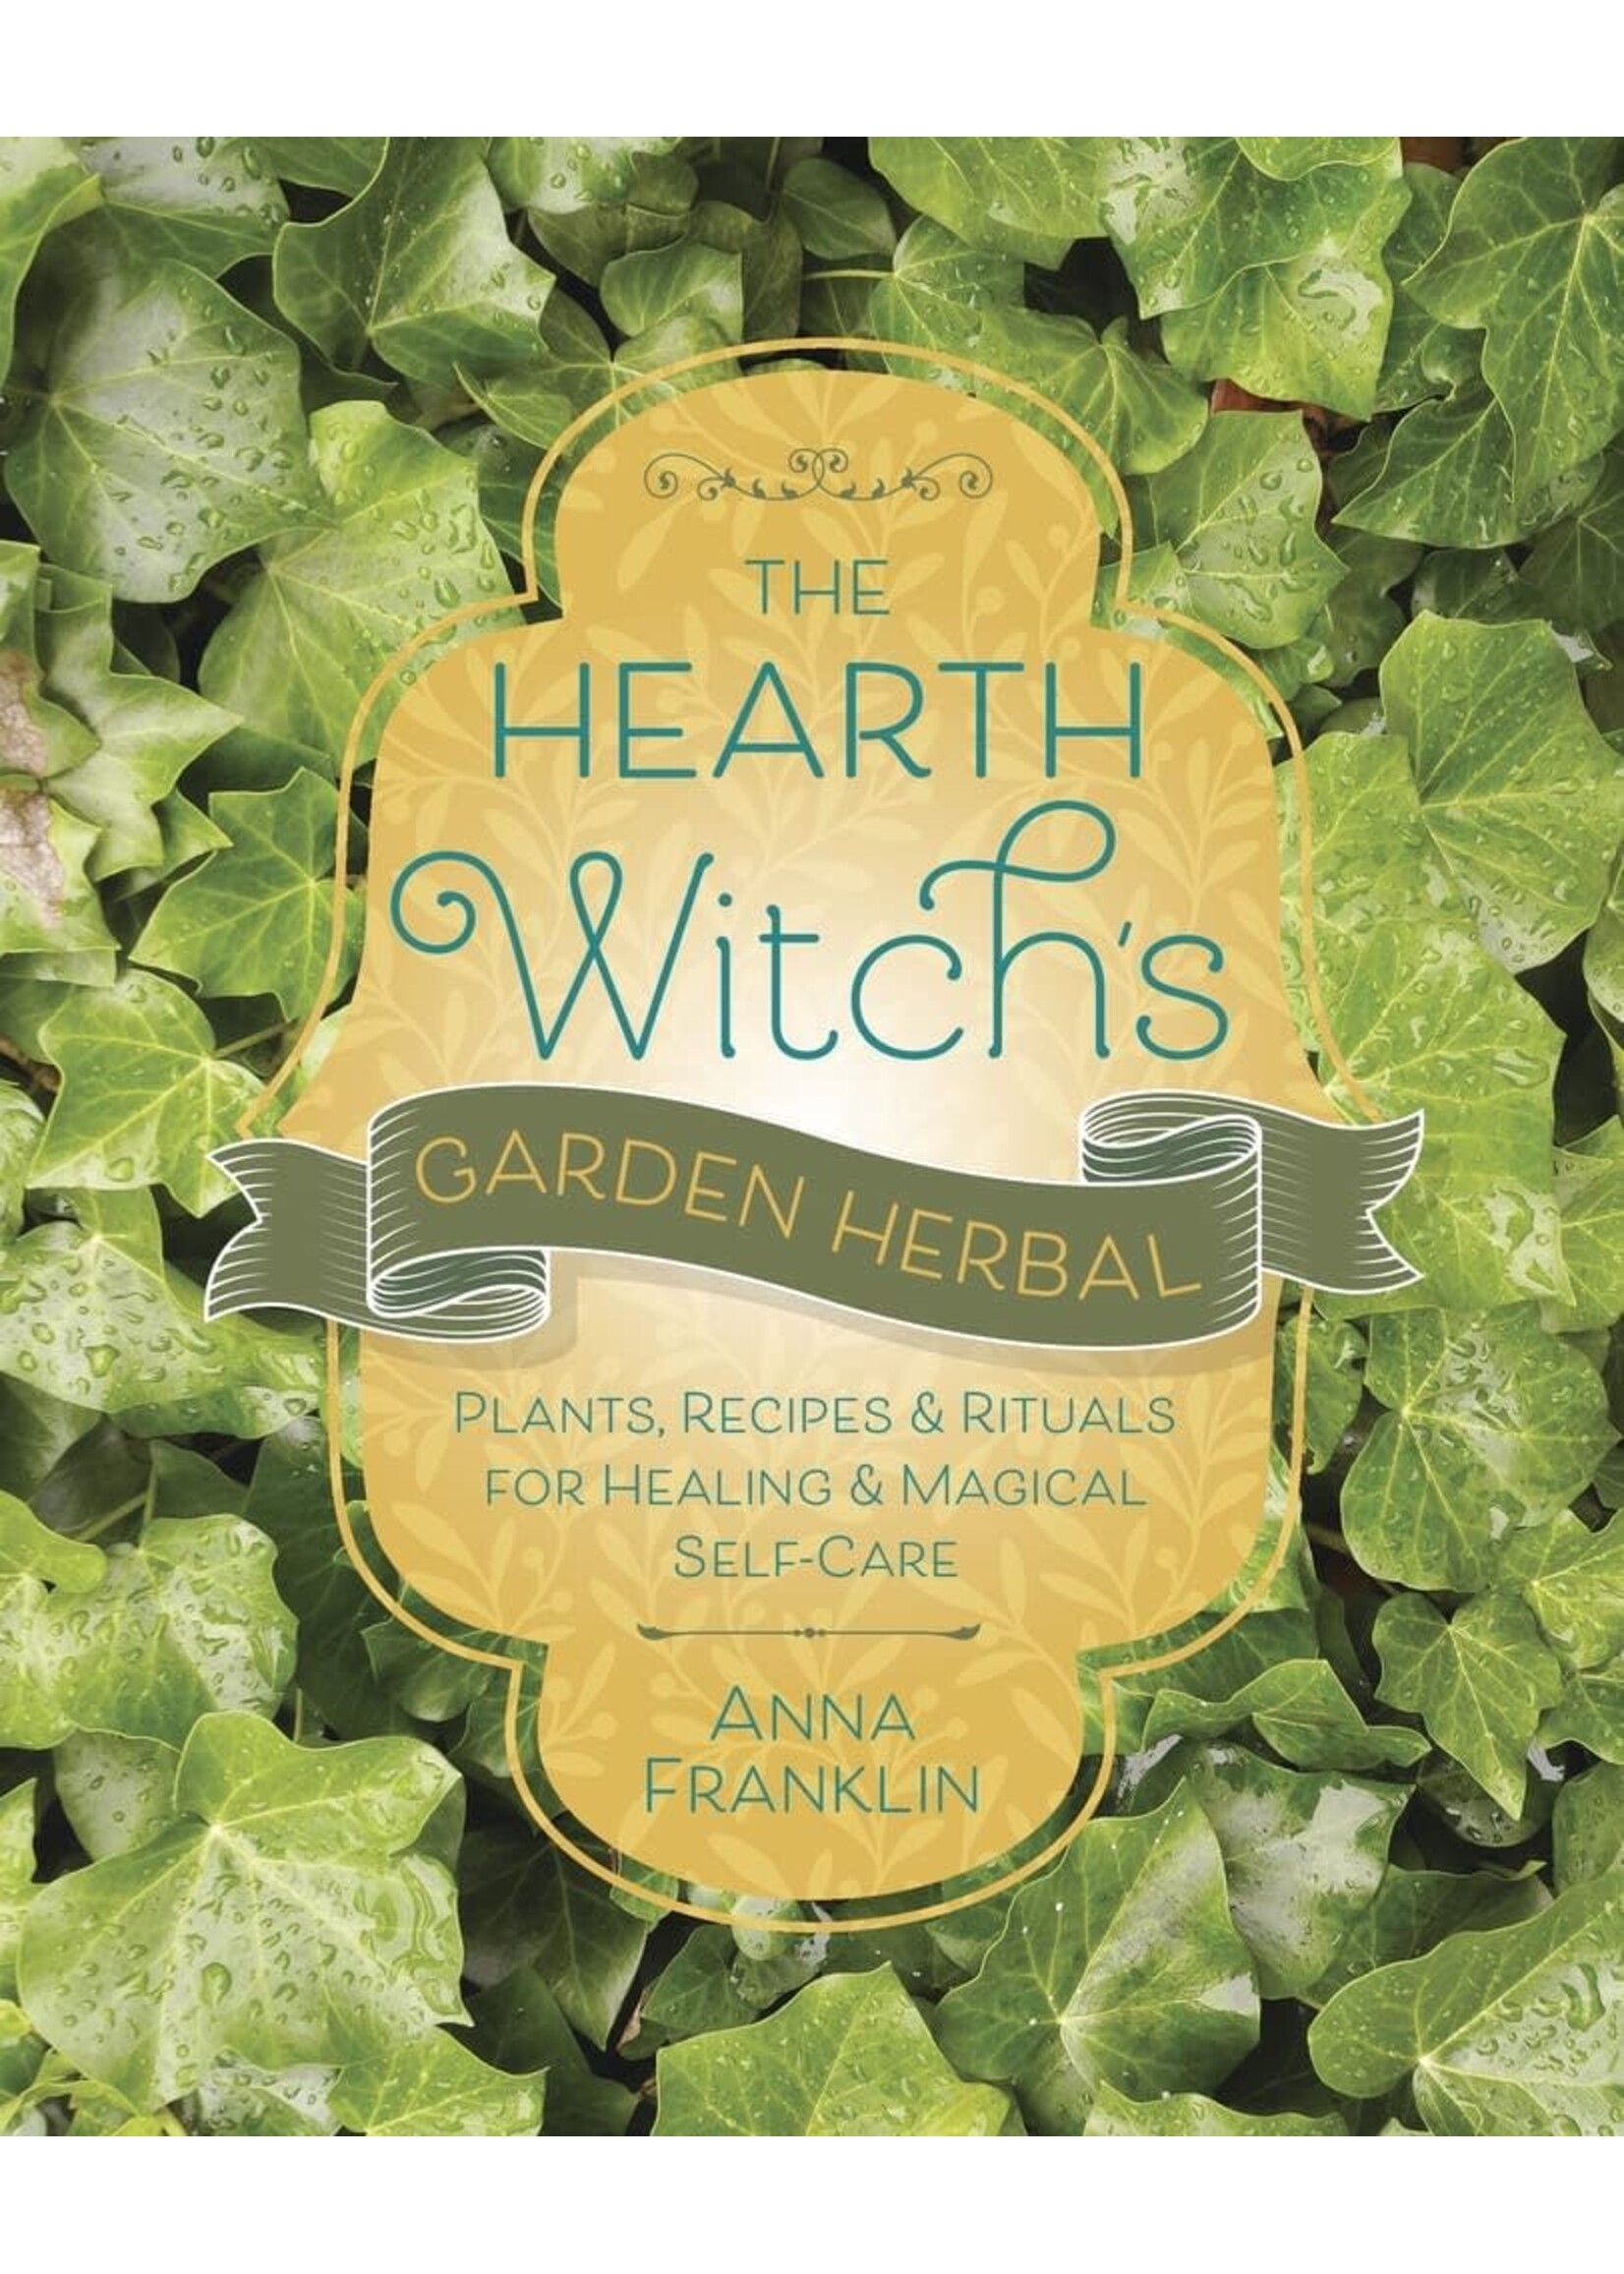 The Hearth Witch's Garden Herbal by Anna Franklin